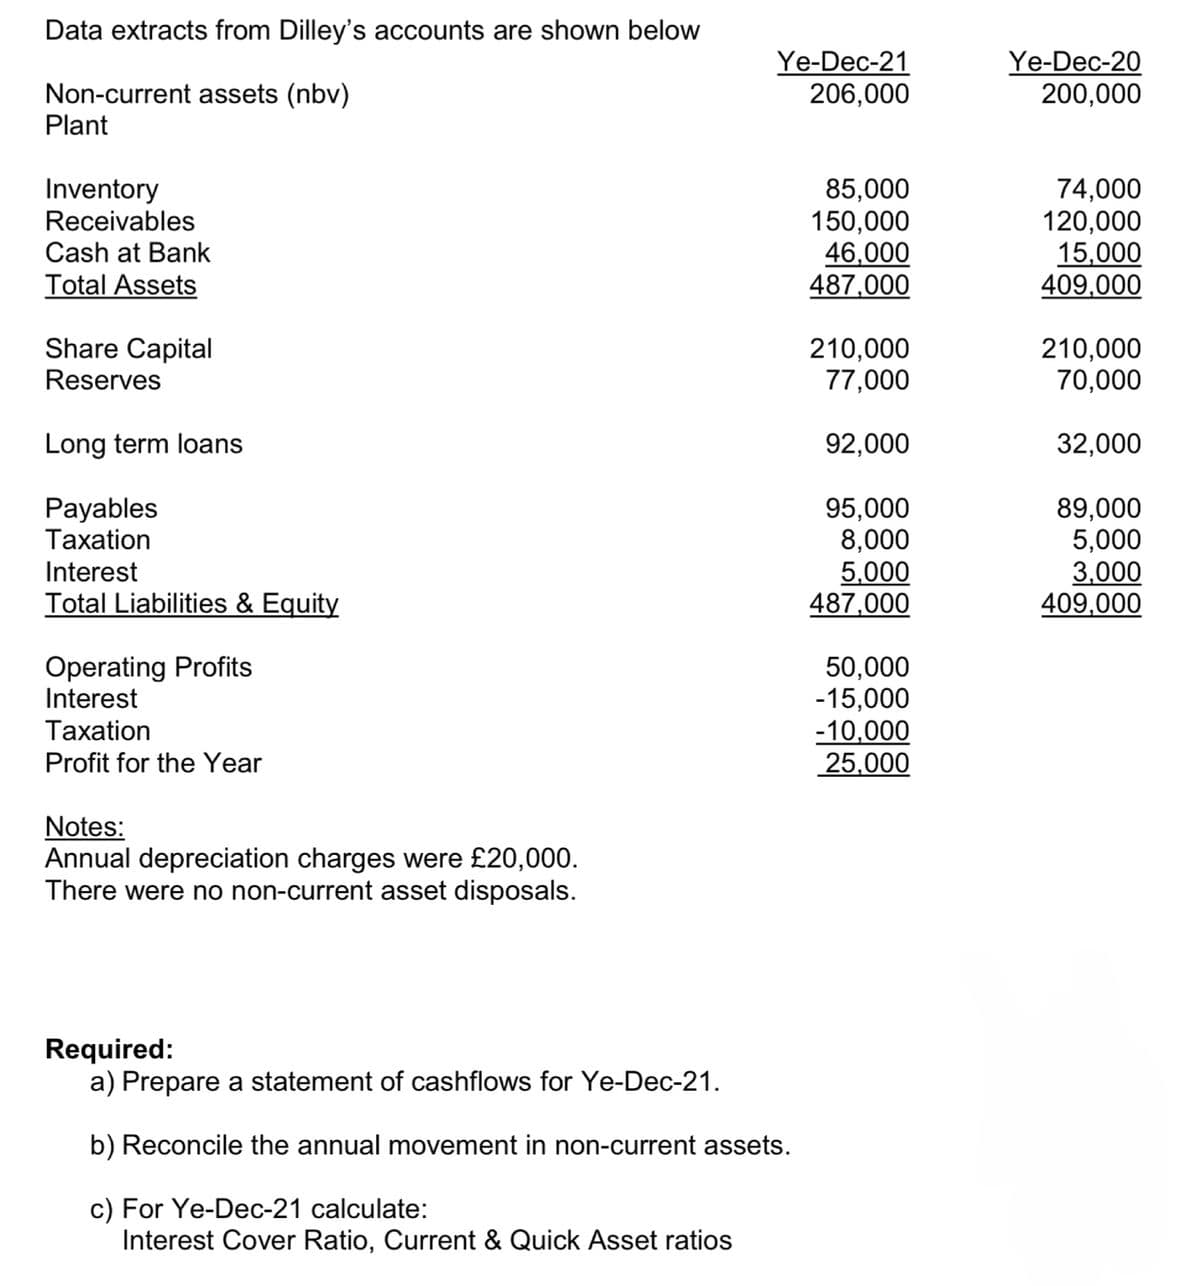 Data extracts from Dilley's accounts are shown below
Ye-Dec-21
Ye-Dec-20
Non-current assets (nbv)
206,000
200,000
Plant
Inventory
Receivables
Cash at Bank
Total Assets
Share Capital
Reserves
Long term loans
Payables
Taxation
Interest
Total Liabilities & Equity
Operating Profits
Interest
Taxation
Profit for the Year
Notes:
Annual depreciation charges were £20,000.
There were no non-current asset disposals.
Required:
a) Prepare a statement of cashflows for Ye-Dec-21.
b) Reconcile the annual movement in non-current assets.
c) For Ye-Dec-21 calculate:
Interest Cover Ratio, Current & Quick Asset ratios
85,000
74,000
150,000
120,000
46,000
15,000
487,000
409,000
210,000
210,000
77,000
70,000
92,000
32,000
95,000
89,000
8,000
5,000
5,000
3,000
487,000
409,000
50,000
-15,000
-10,000
25,000